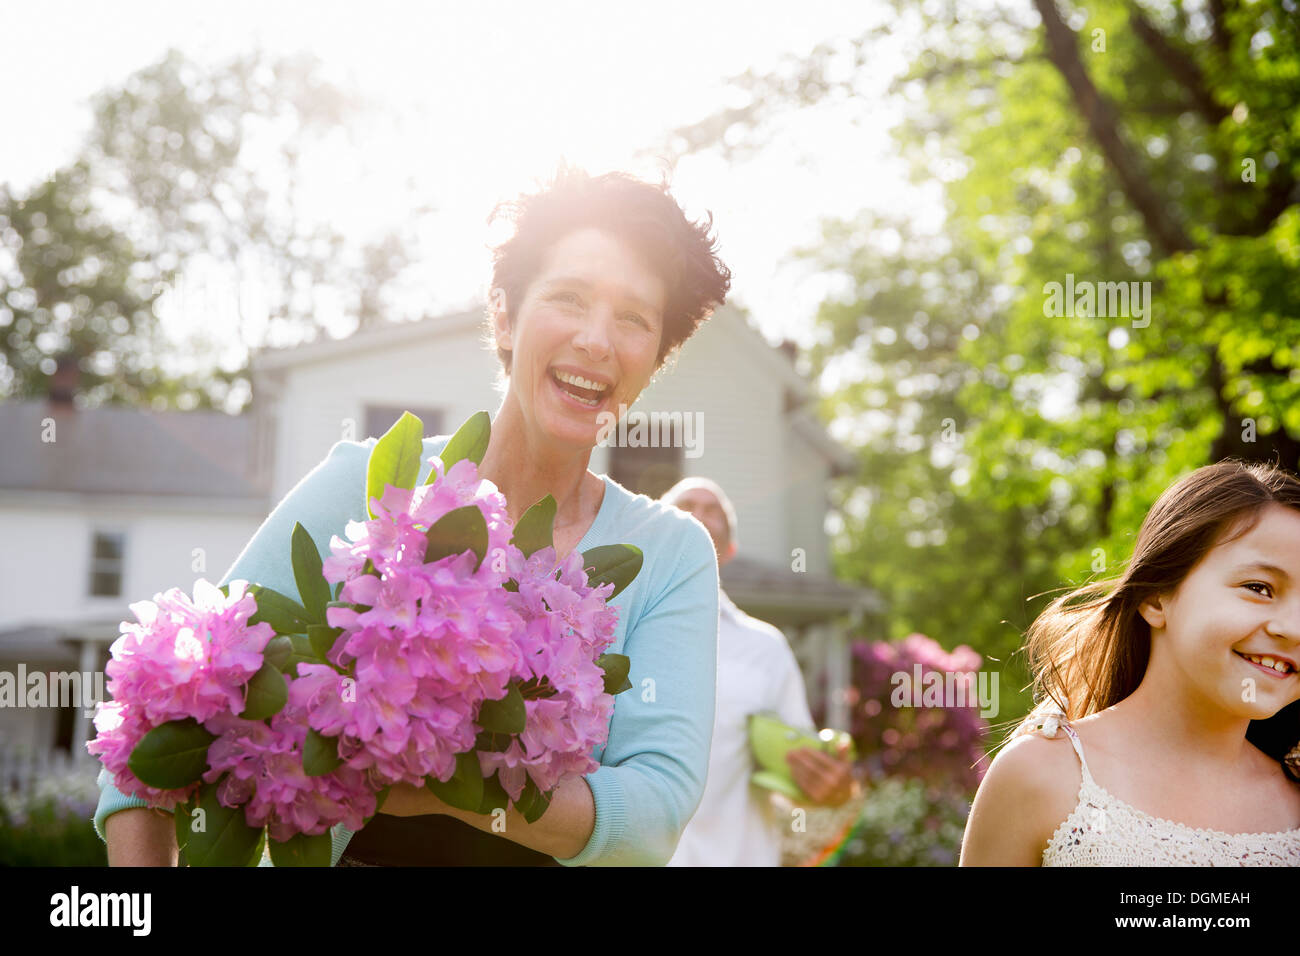 Family party. A woman carrying a large bunch of rhododendron flowers, smiling broadly. Stock Photo